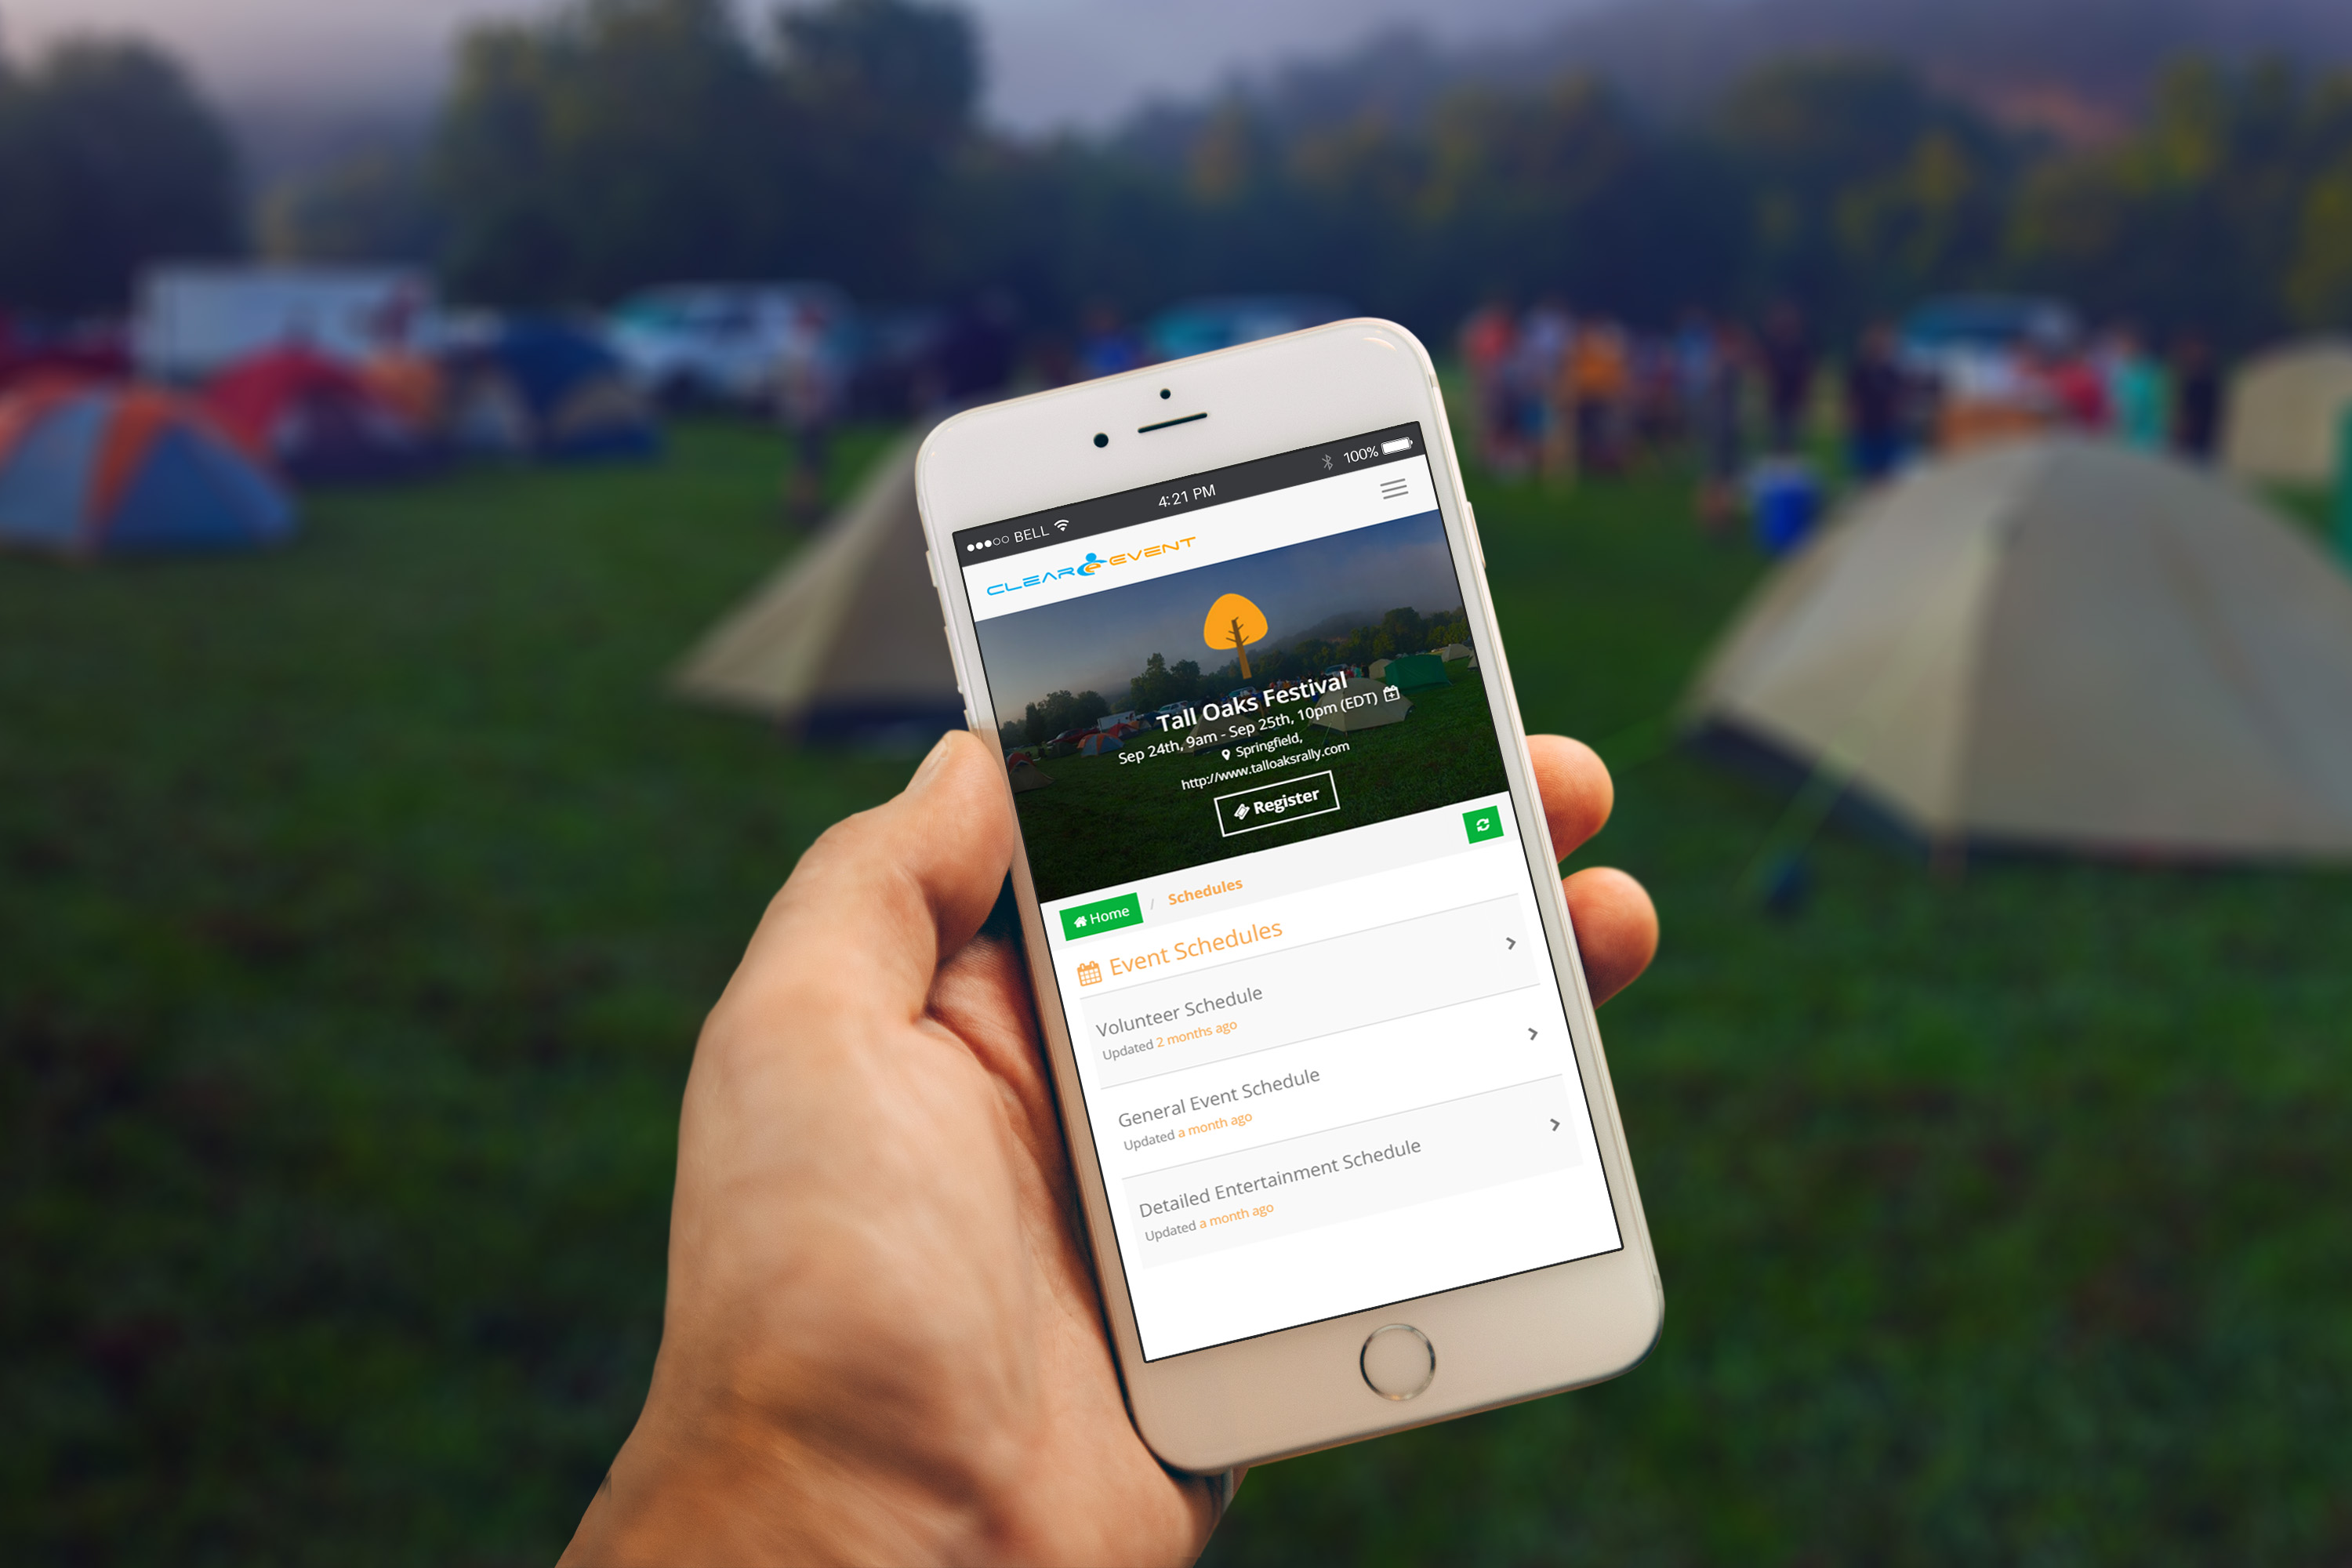 Use ClearEvent's built-in event web app to share personalized event details with your attendees.